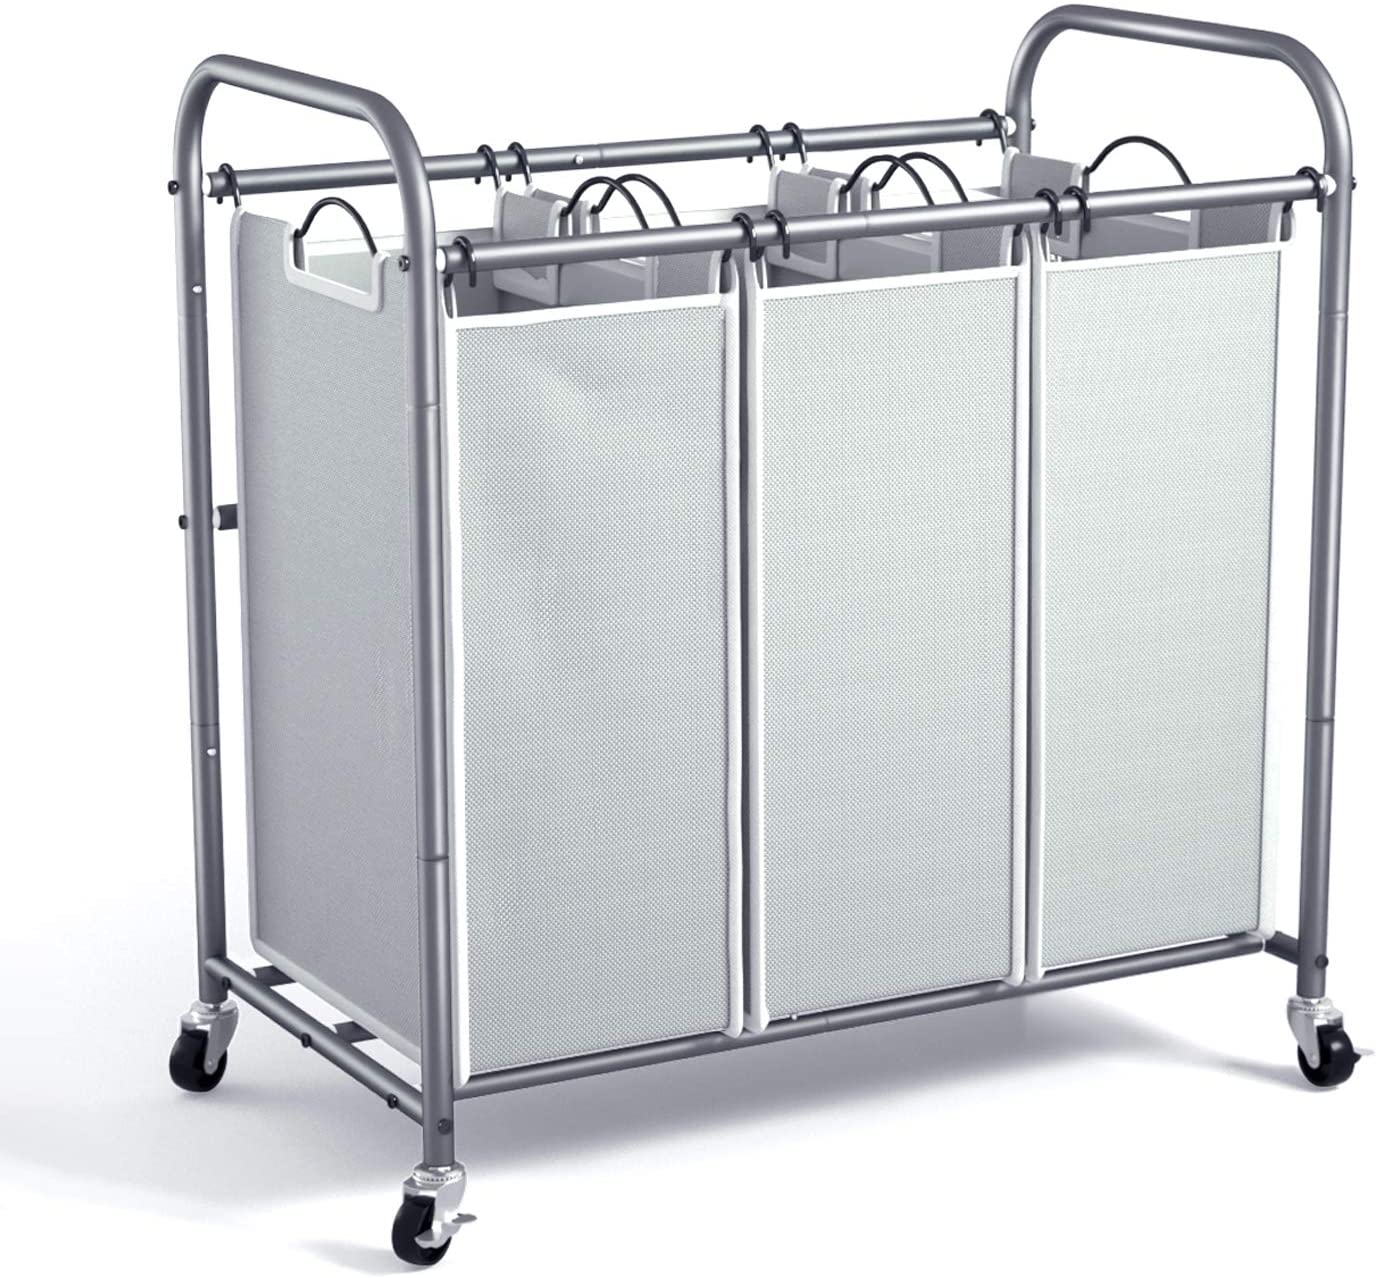 Laundry Organizer Cart for Clothes Storage